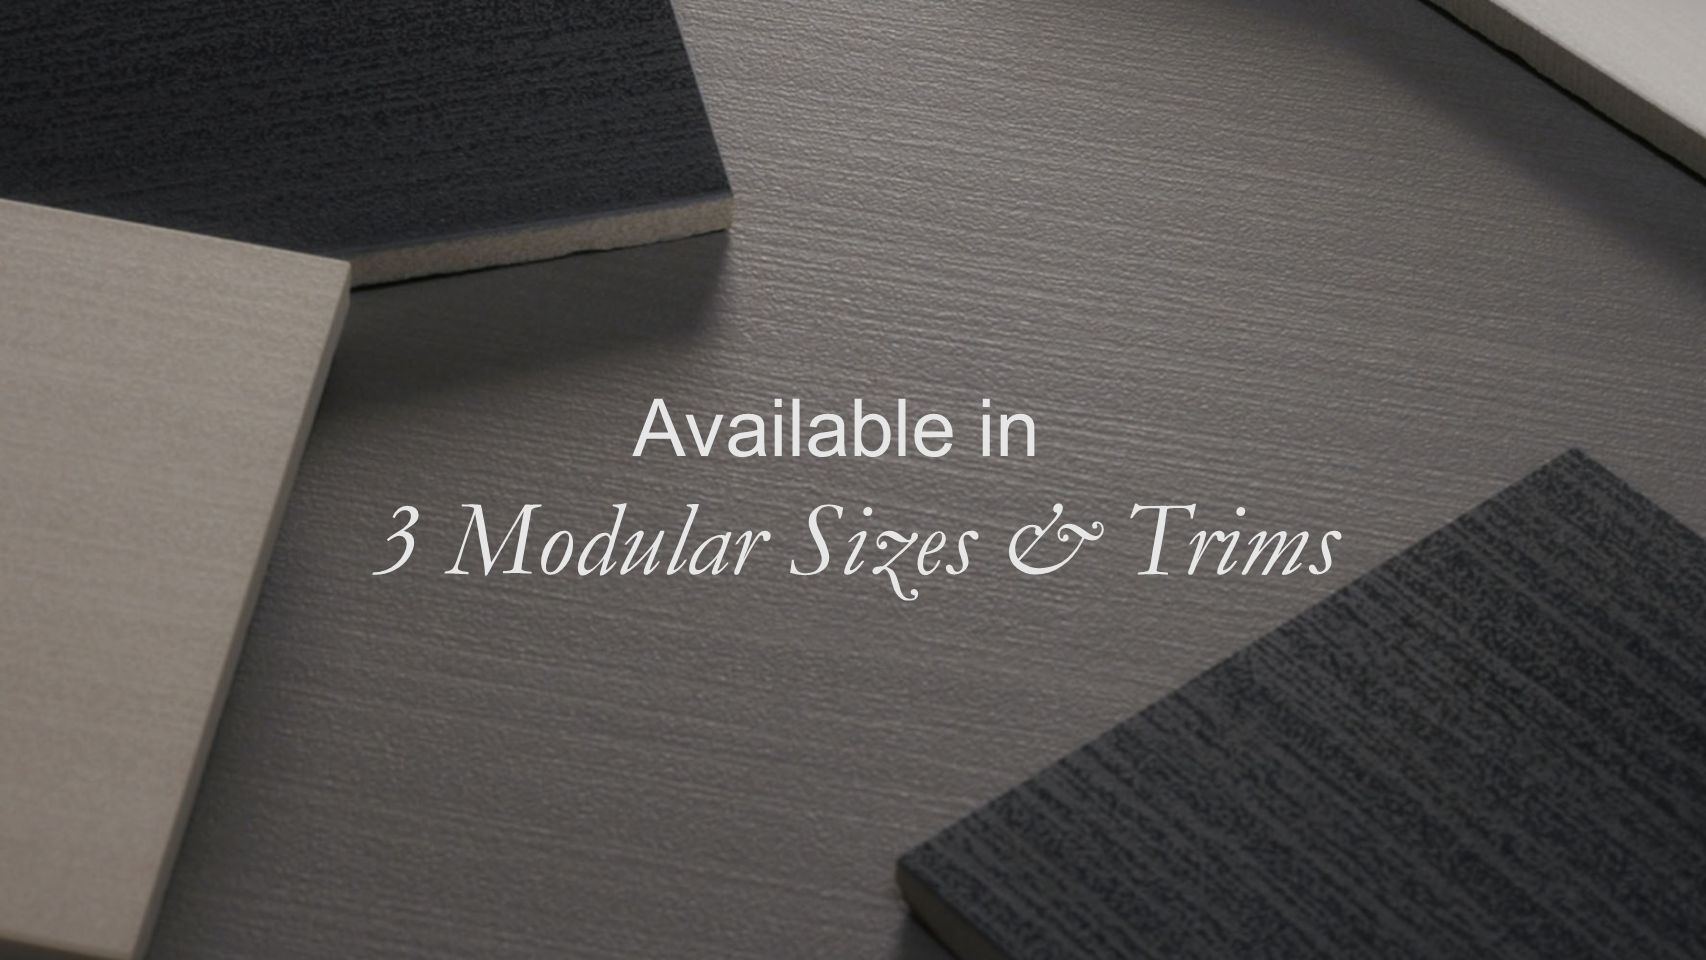 Available in 3 Modular Sizes & Trims